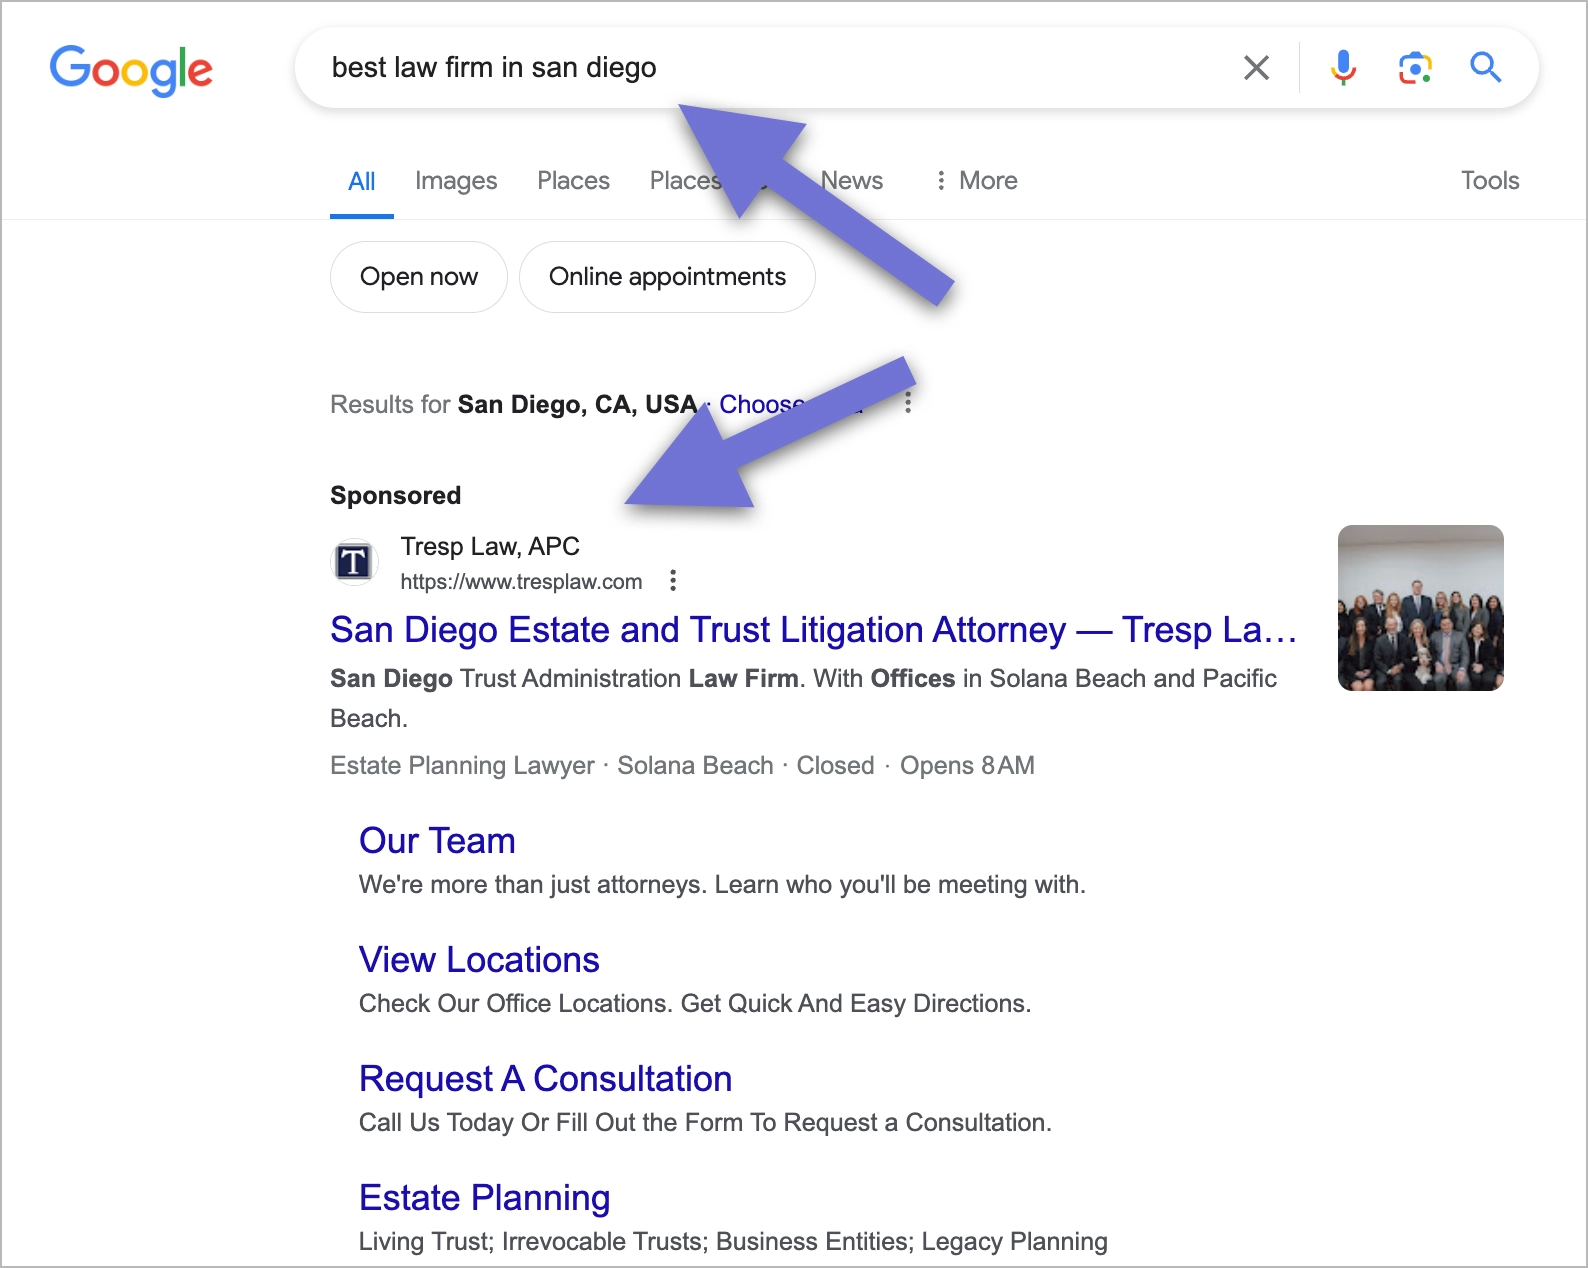 paid search results for law firm in San Diego